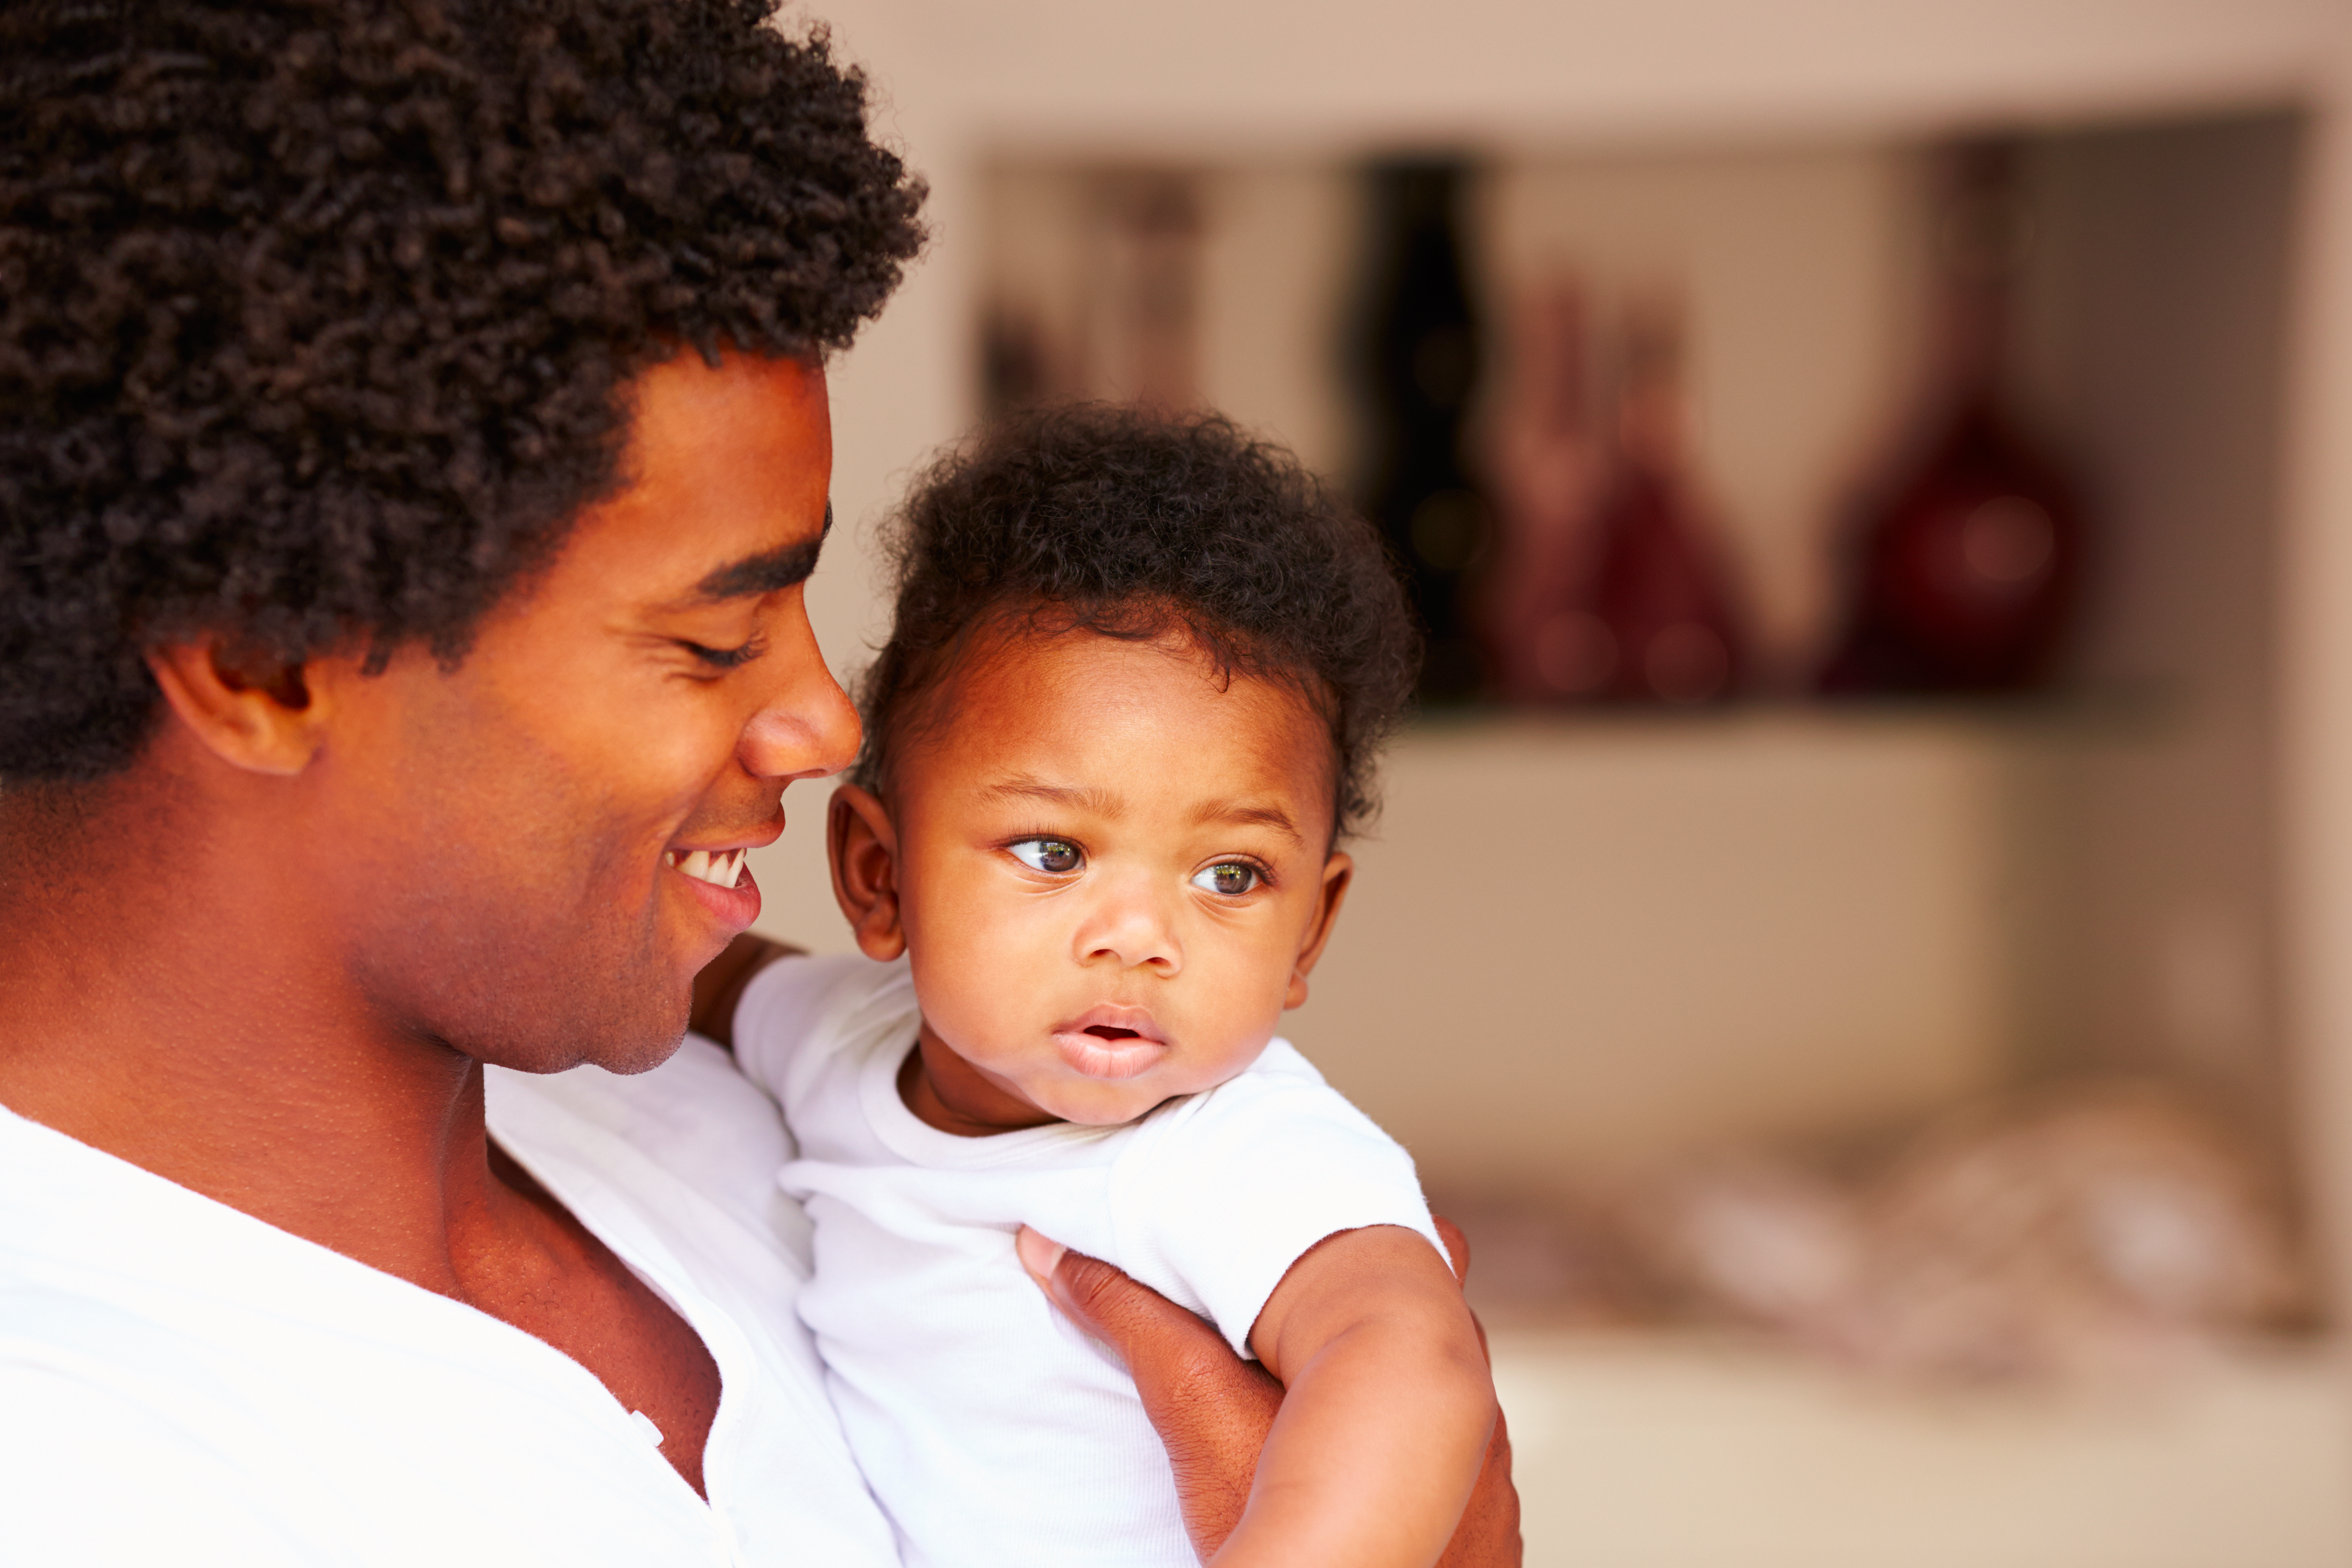 For Fathers, Providing Support for a VBAC Can Be Challenging